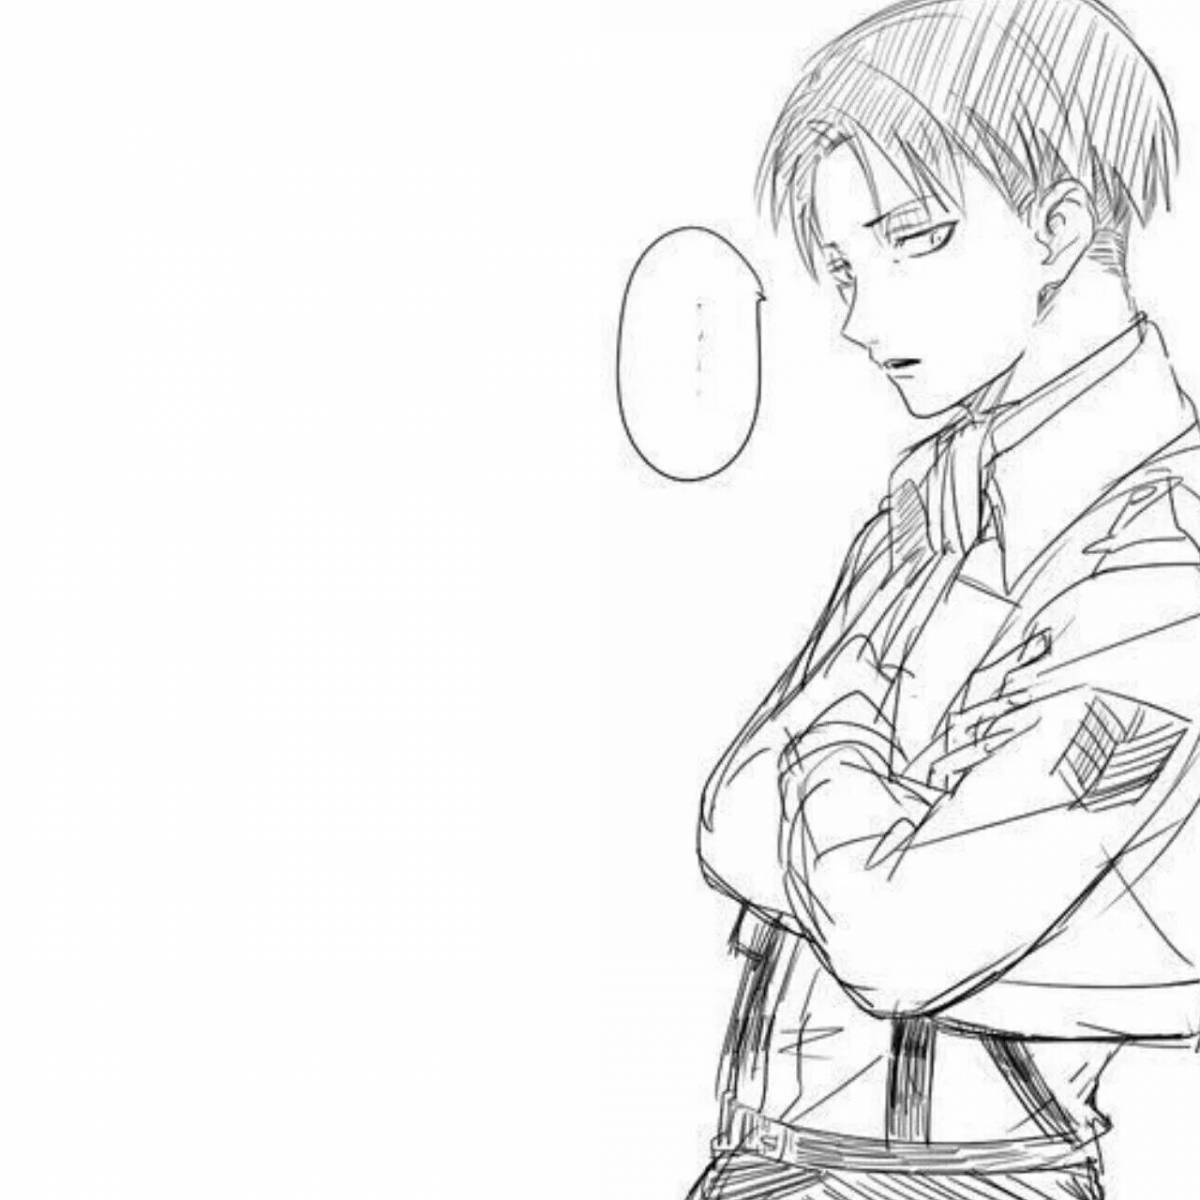 Attack on titan levi daring coloring page